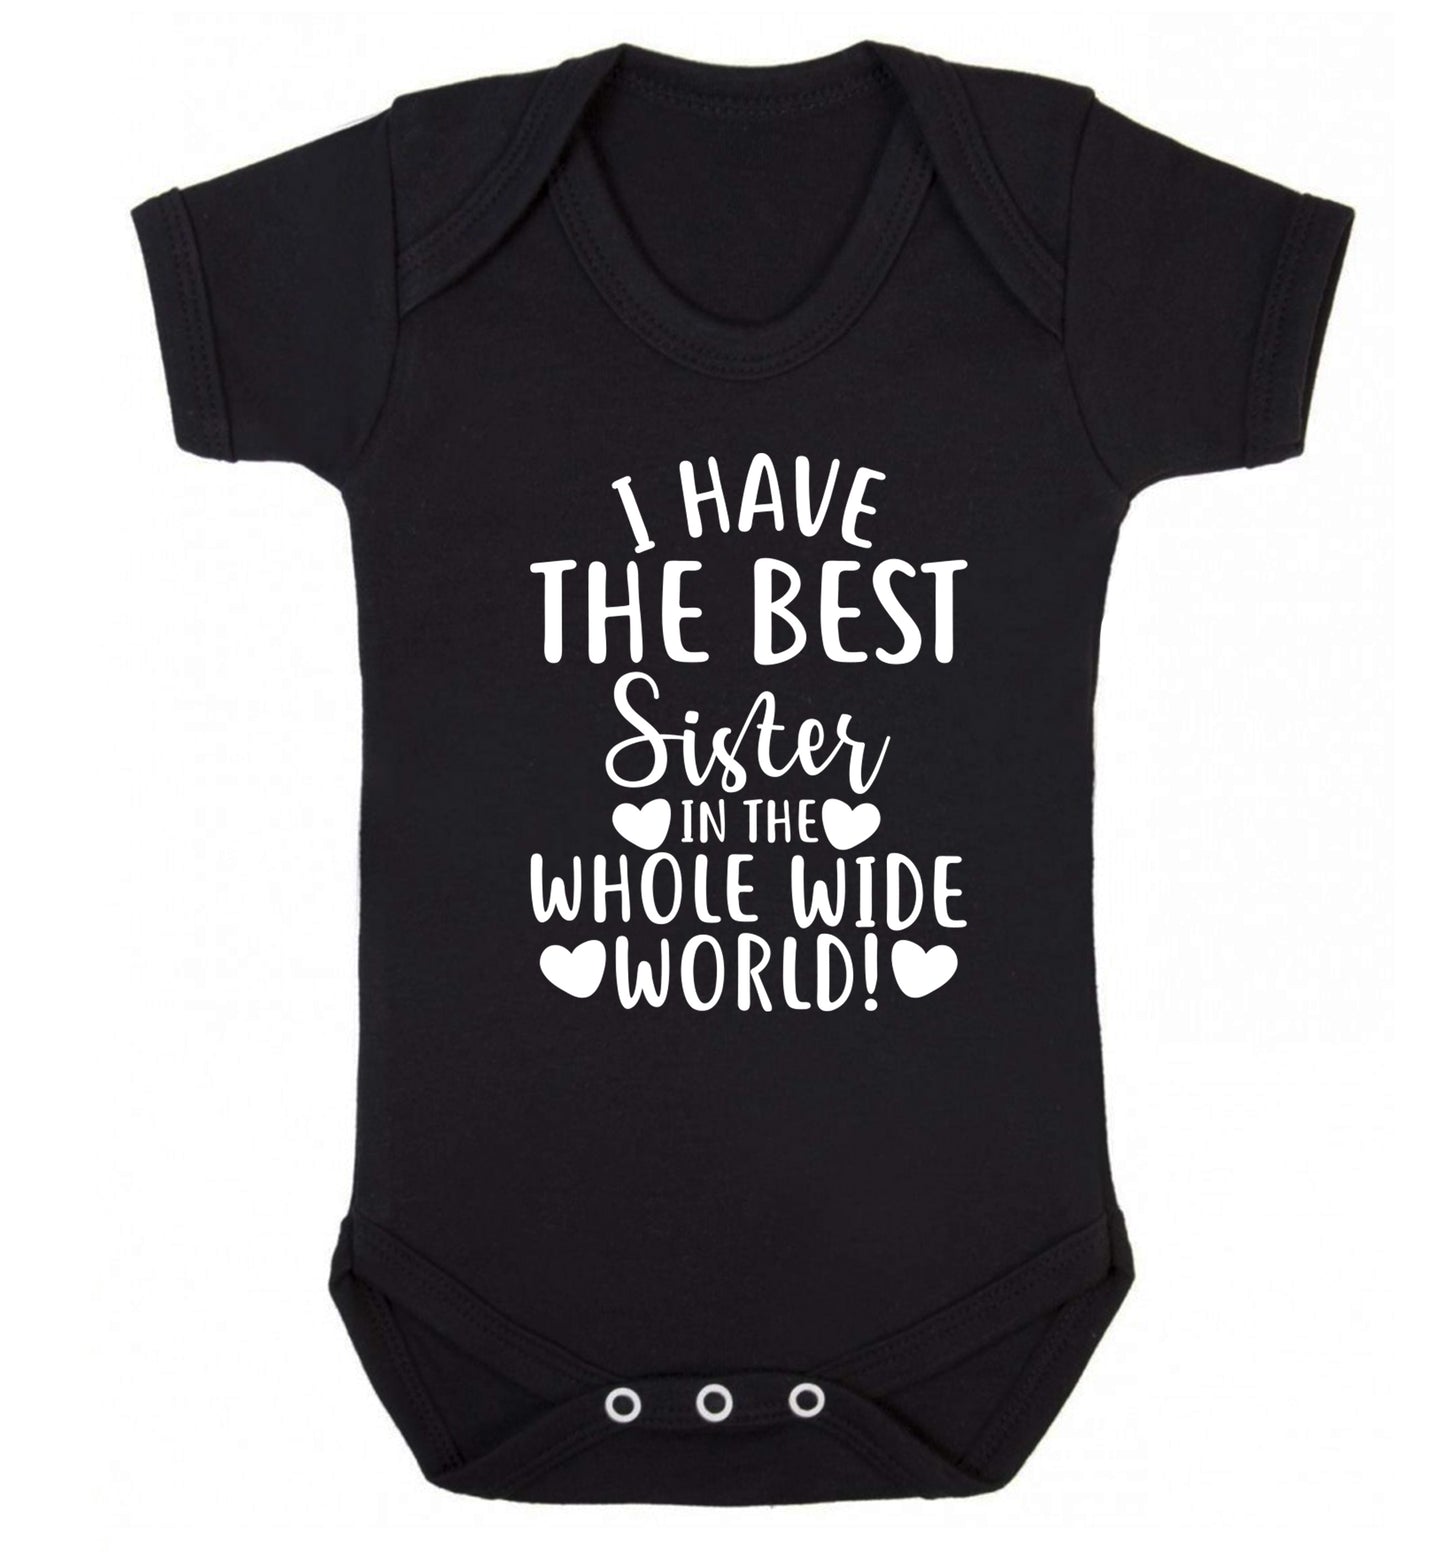 I have the best sister in the whole wide world! Baby Vest black 18-24 months